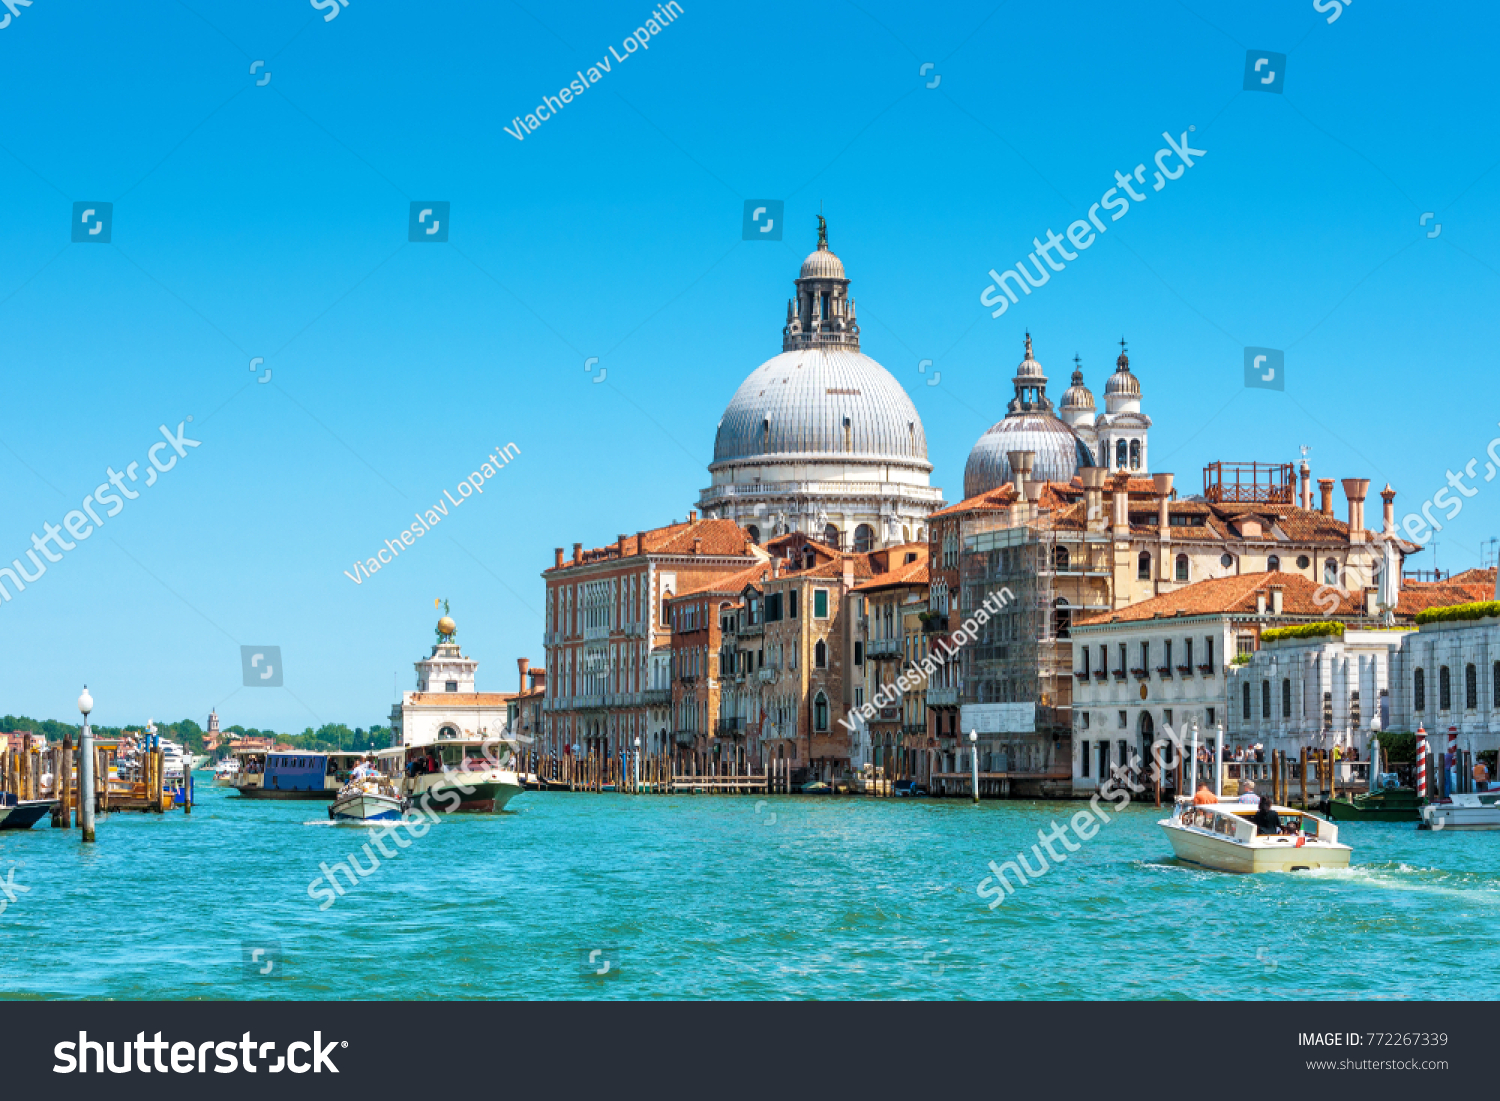 Basilica of Santa Maria della Salute on the Grand Canal in Venice, Italy. Grand Canal is one of main travel attractions of Venice. Historical buildings and landscape of Venice. Water trip in Venice. #772267339